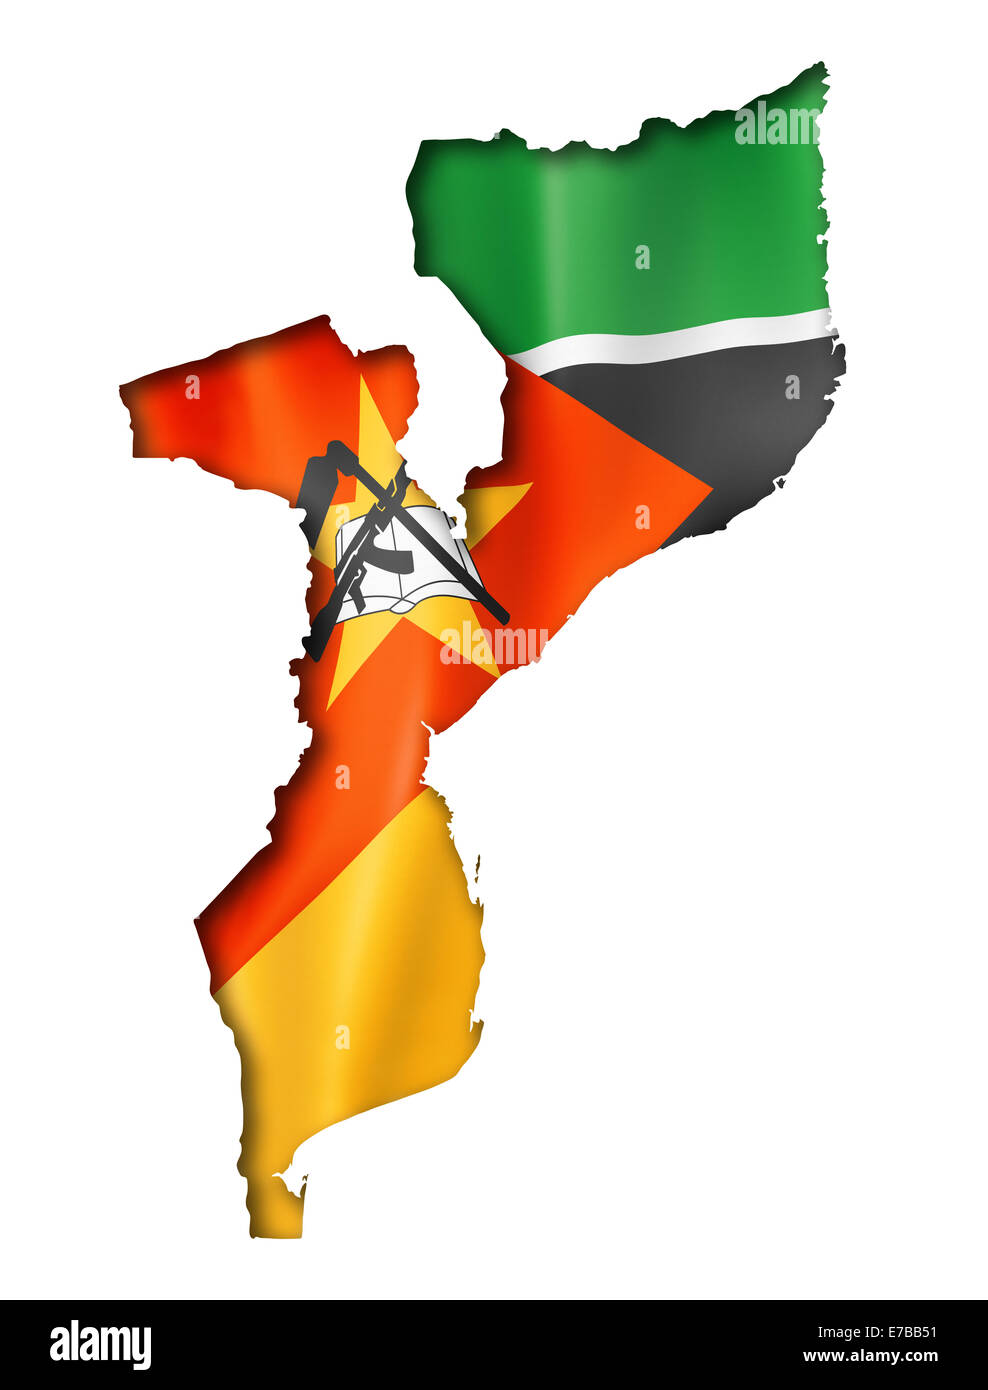 Mozambique flag map, three dimensional render, isolated on white Stock Photo